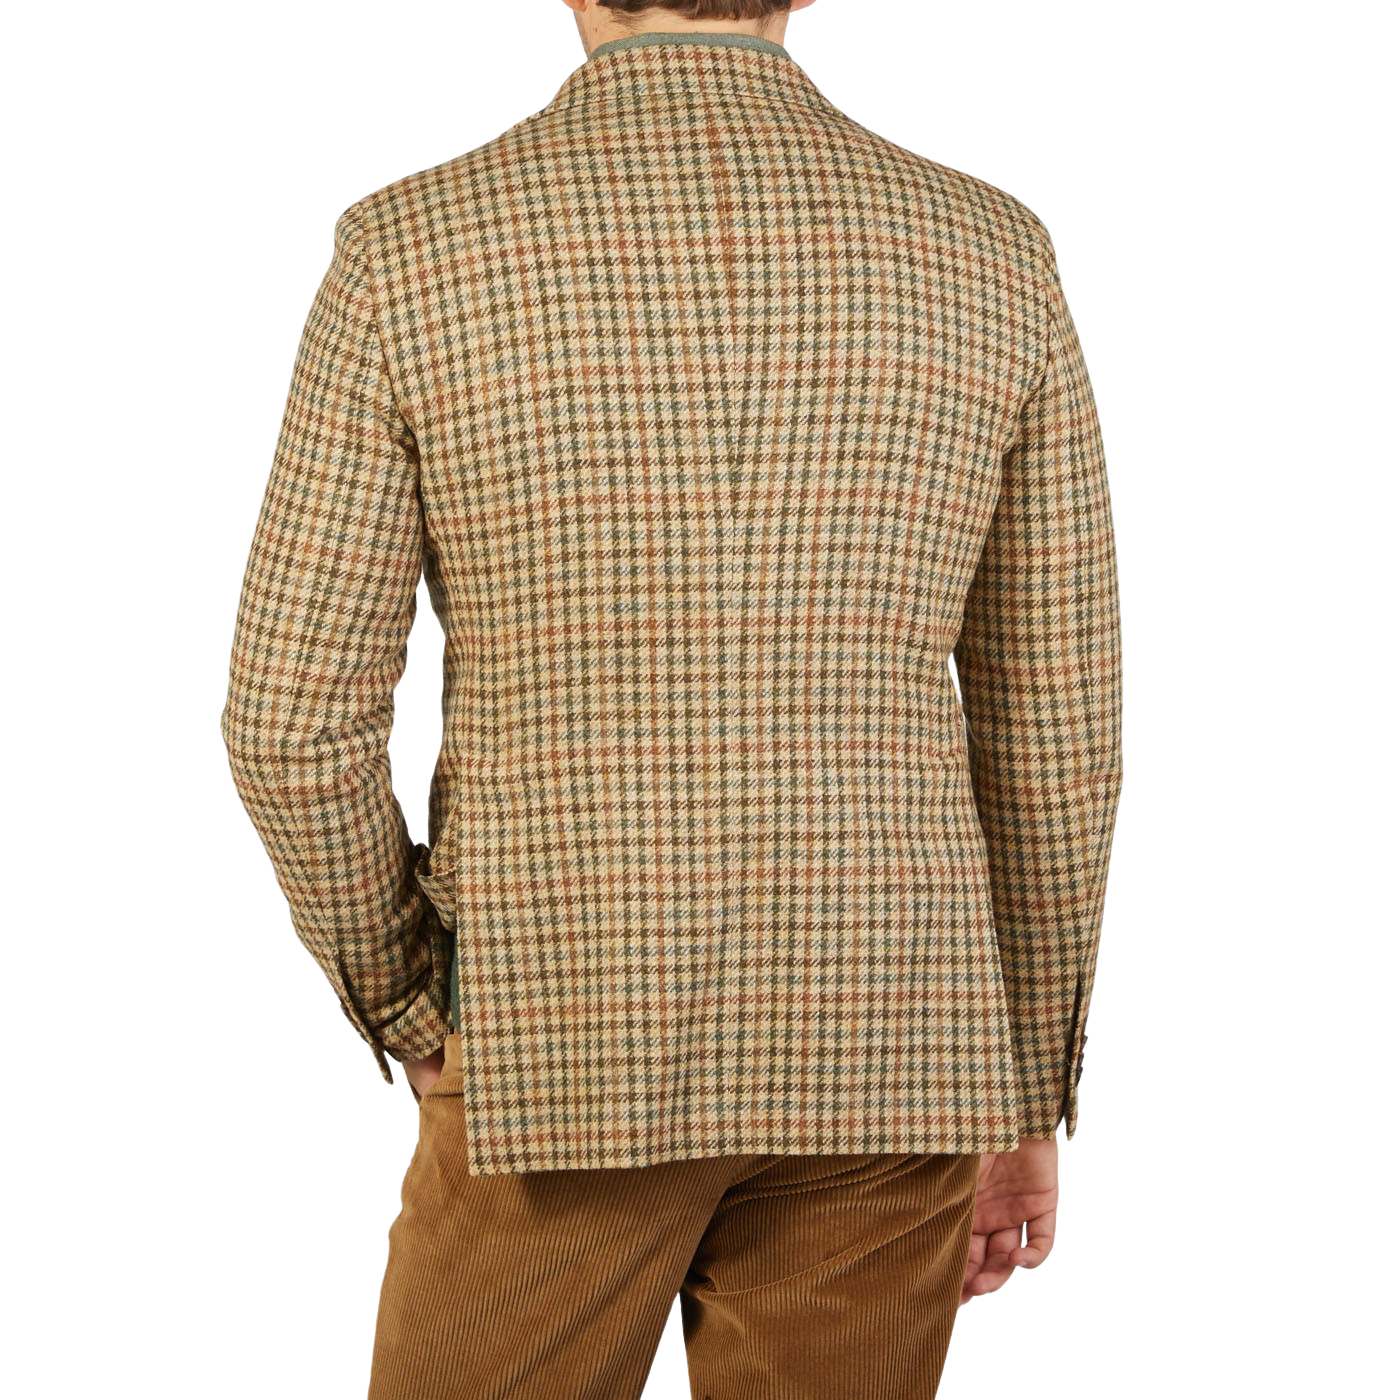 The back view of a man wearing a Beige Houndstooth Wool Tweed Vesuvio blazer by Tagliatore.